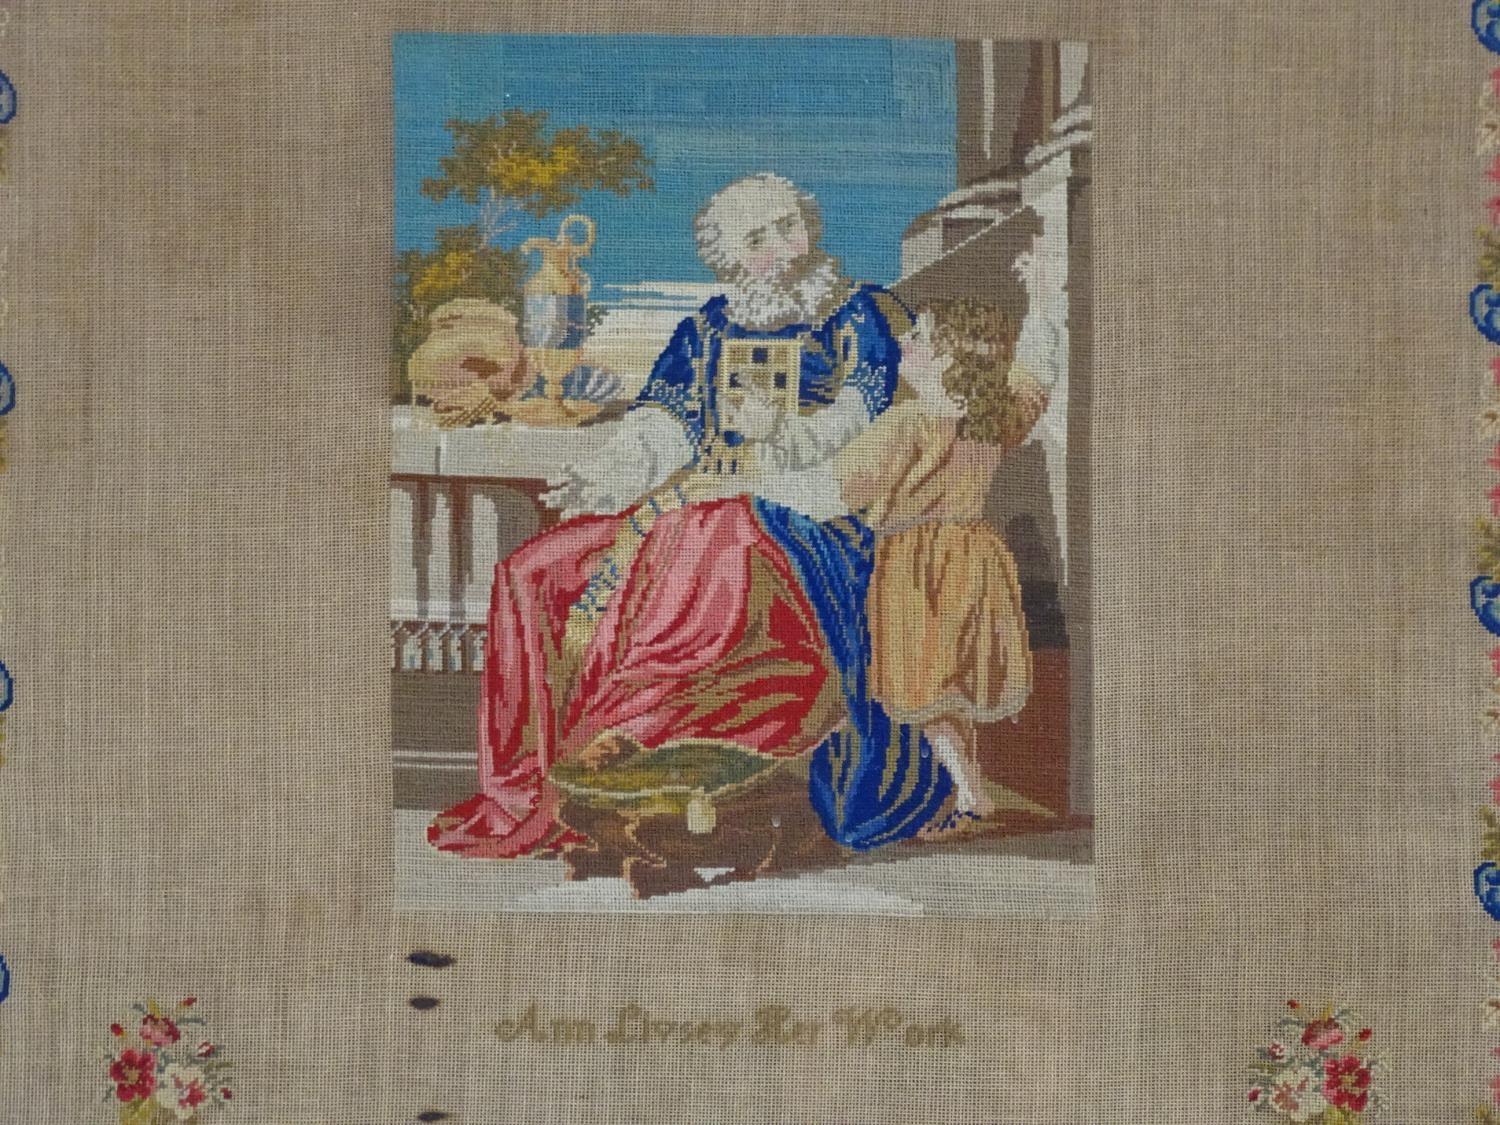 An early 20thC needlework / embroidery / tapestry sampler depicting a philosopher and student in a - Image 3 of 3